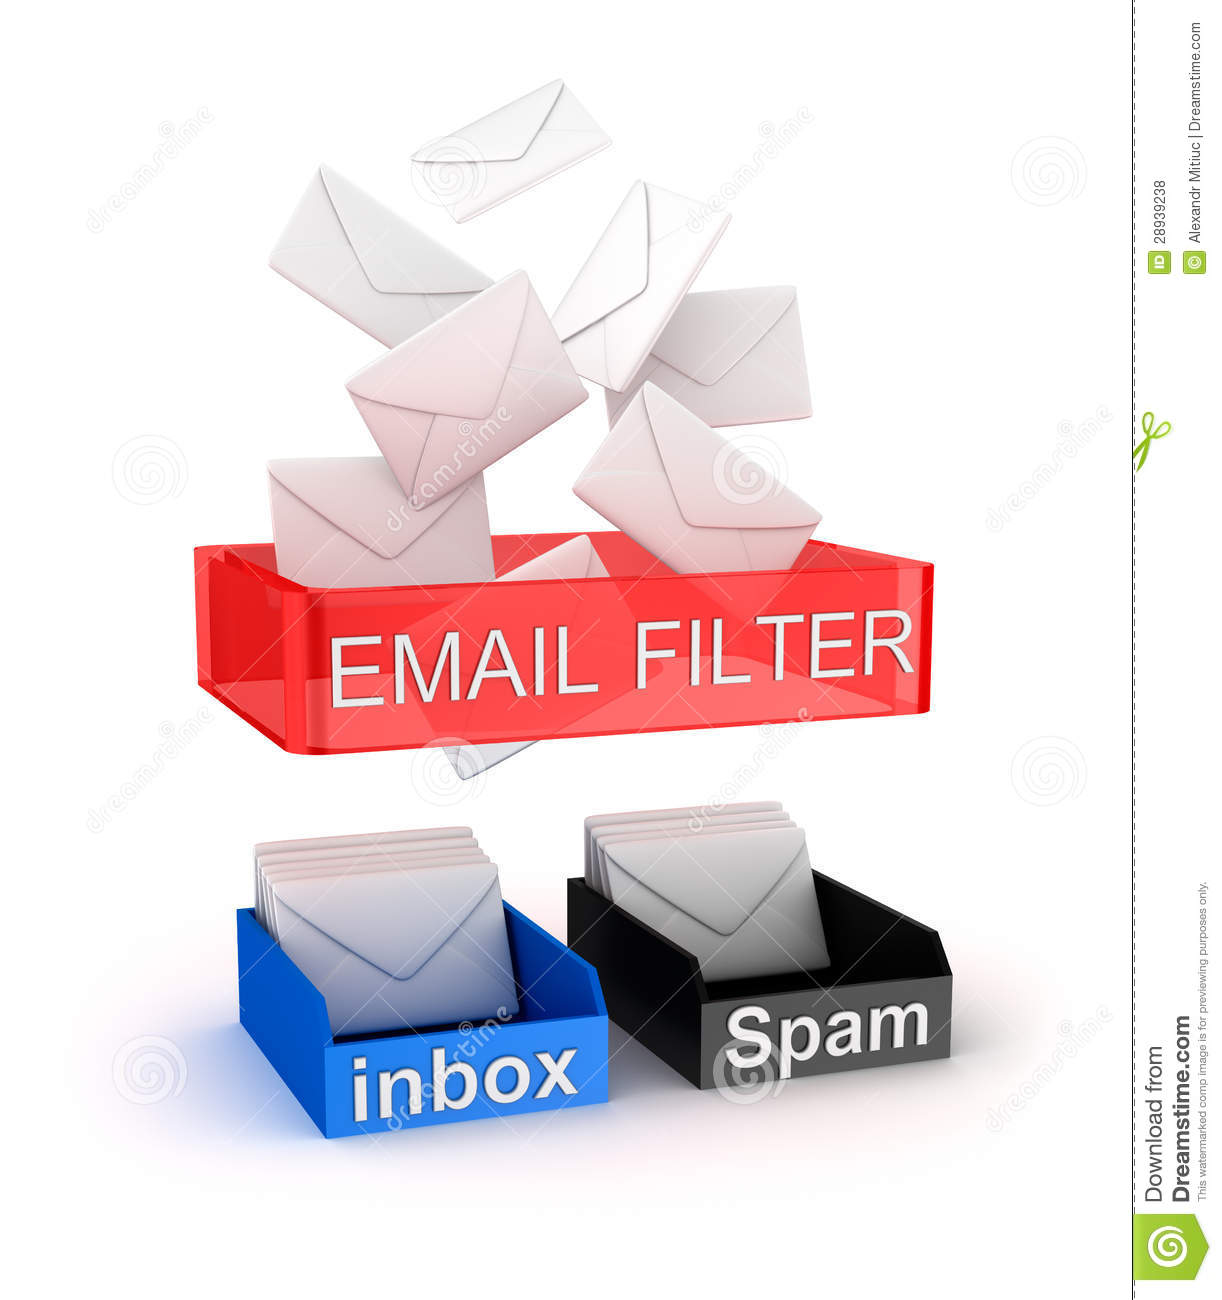 EMailFilter